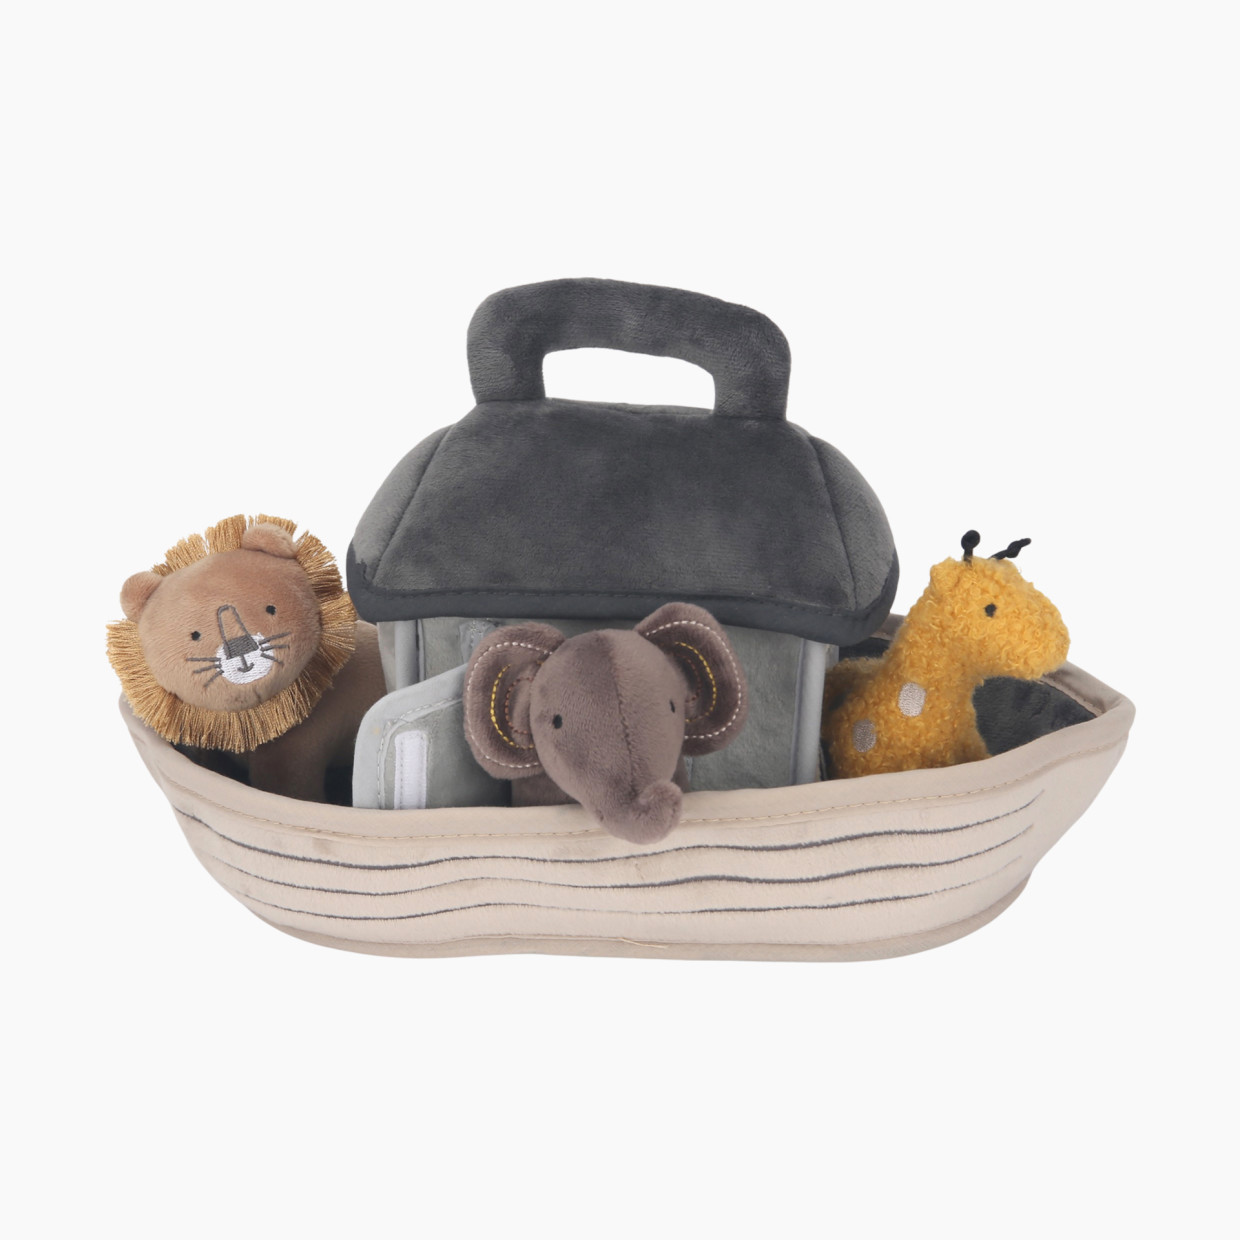 Lambs & Ivy Interactive Plush Toy with Animals - Baby Noah.